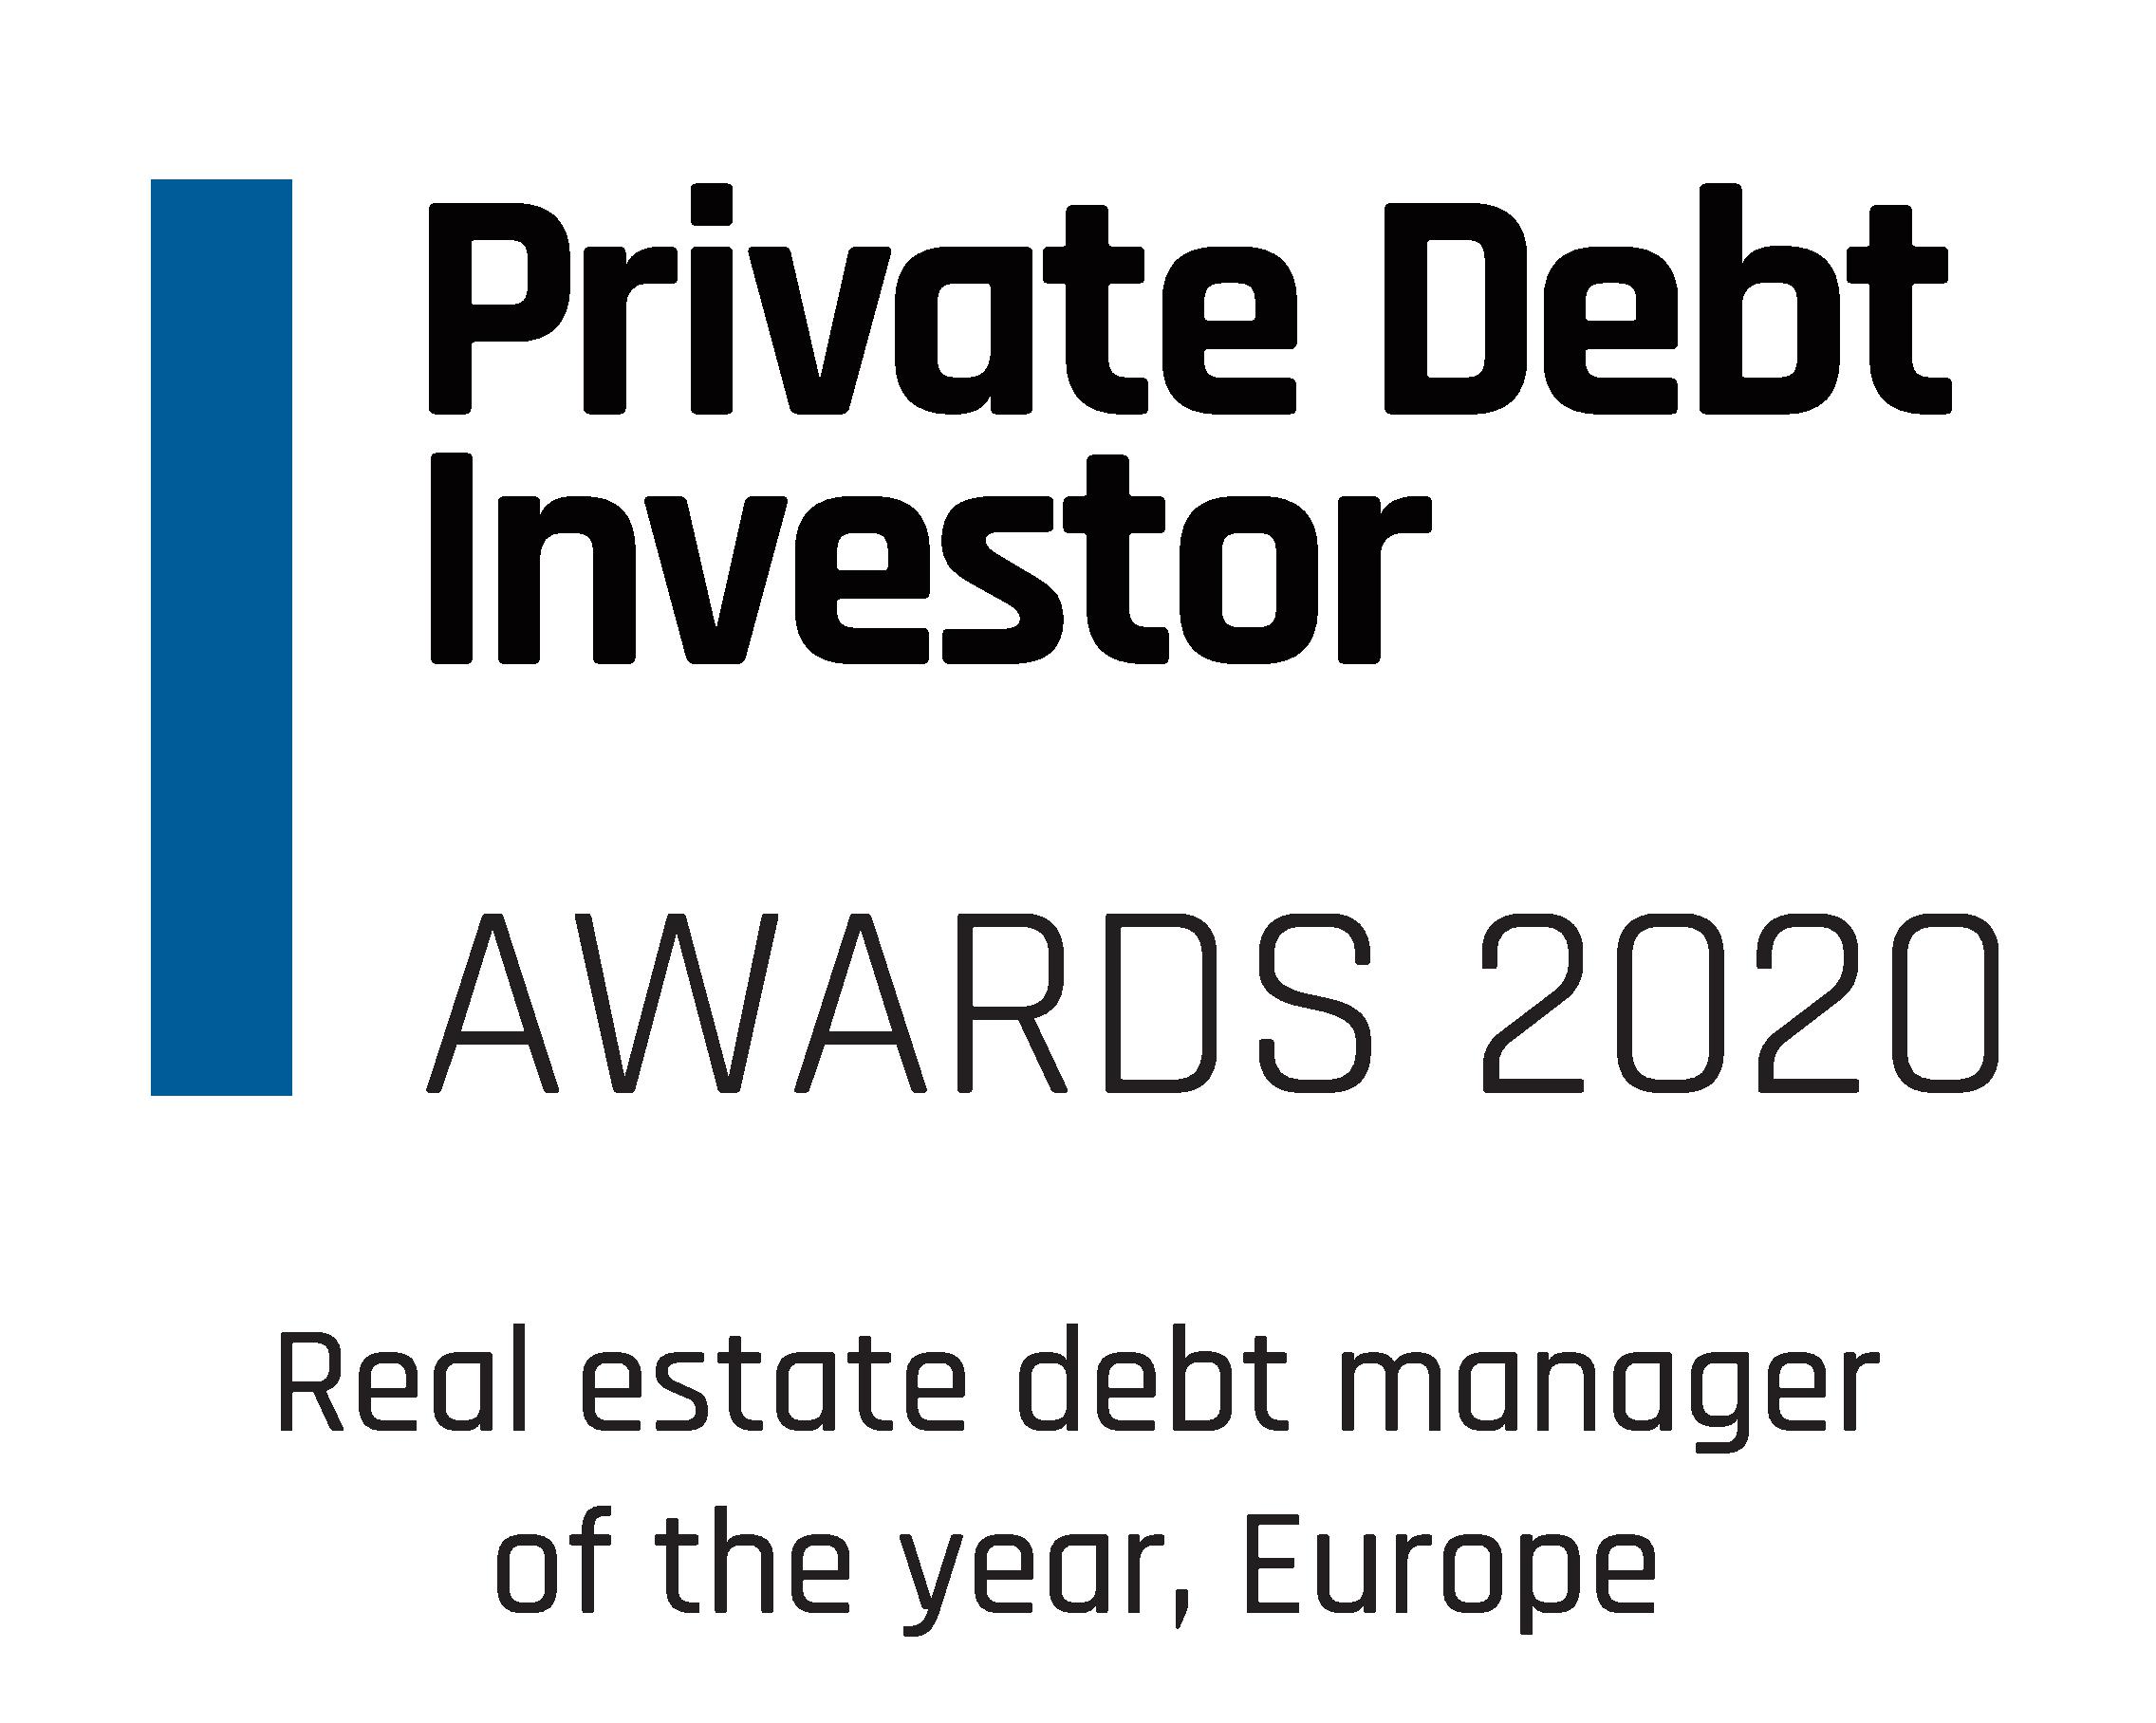 PDI_Real_estate_debt_manager_of_the_year_Europe.eps_2267_1814.jpg